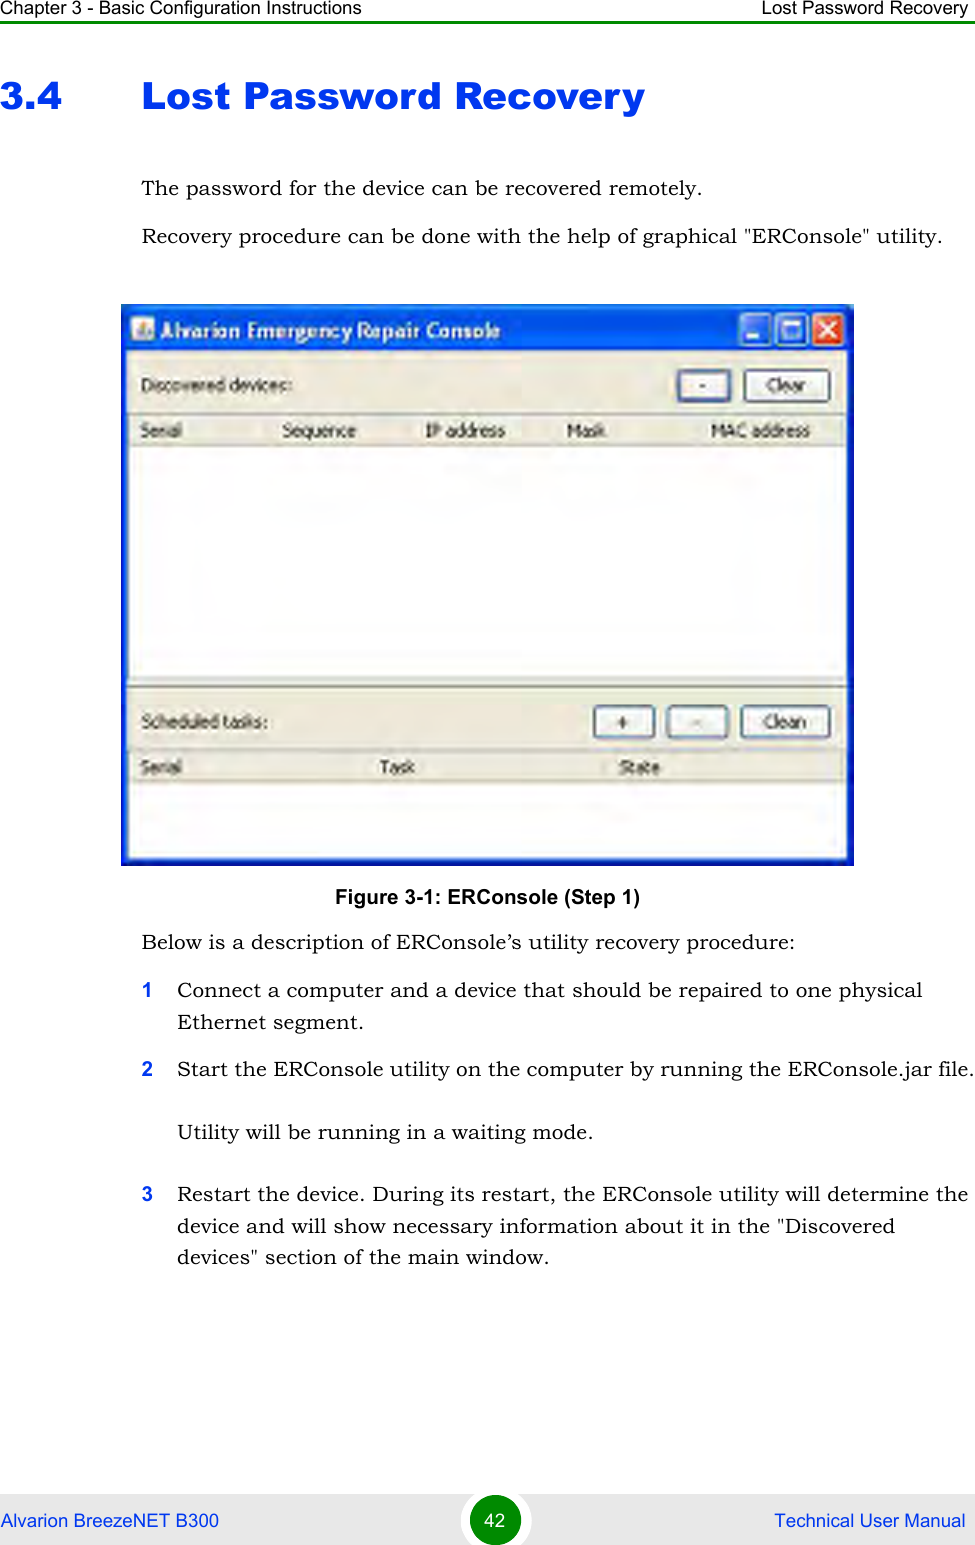 Chapter 3 - Basic Configuration Instructions Lost Password RecoveryAlvarion BreezeNET B300 42  Technical User Manual3.4 Lost Password RecoveryThe password for the device can be recovered remotely.Recovery procedure can be done with the help of graphical &quot;ERConsole&quot; utility.Below is a description of ERConsole’s utility recovery procedure:1Connect a computer and a device that should be repaired to one physical Ethernet segment.2Start the ERConsole utility on the computer by running the ERConsole.jar file.Utility will be running in a waiting mode.3Restart the device. During its restart, the ERConsole utility will determine the device and will show necessary information about it in the &quot;Discovered devices&quot; section of the main window.Figure 3-1: ERConsole (Step 1)